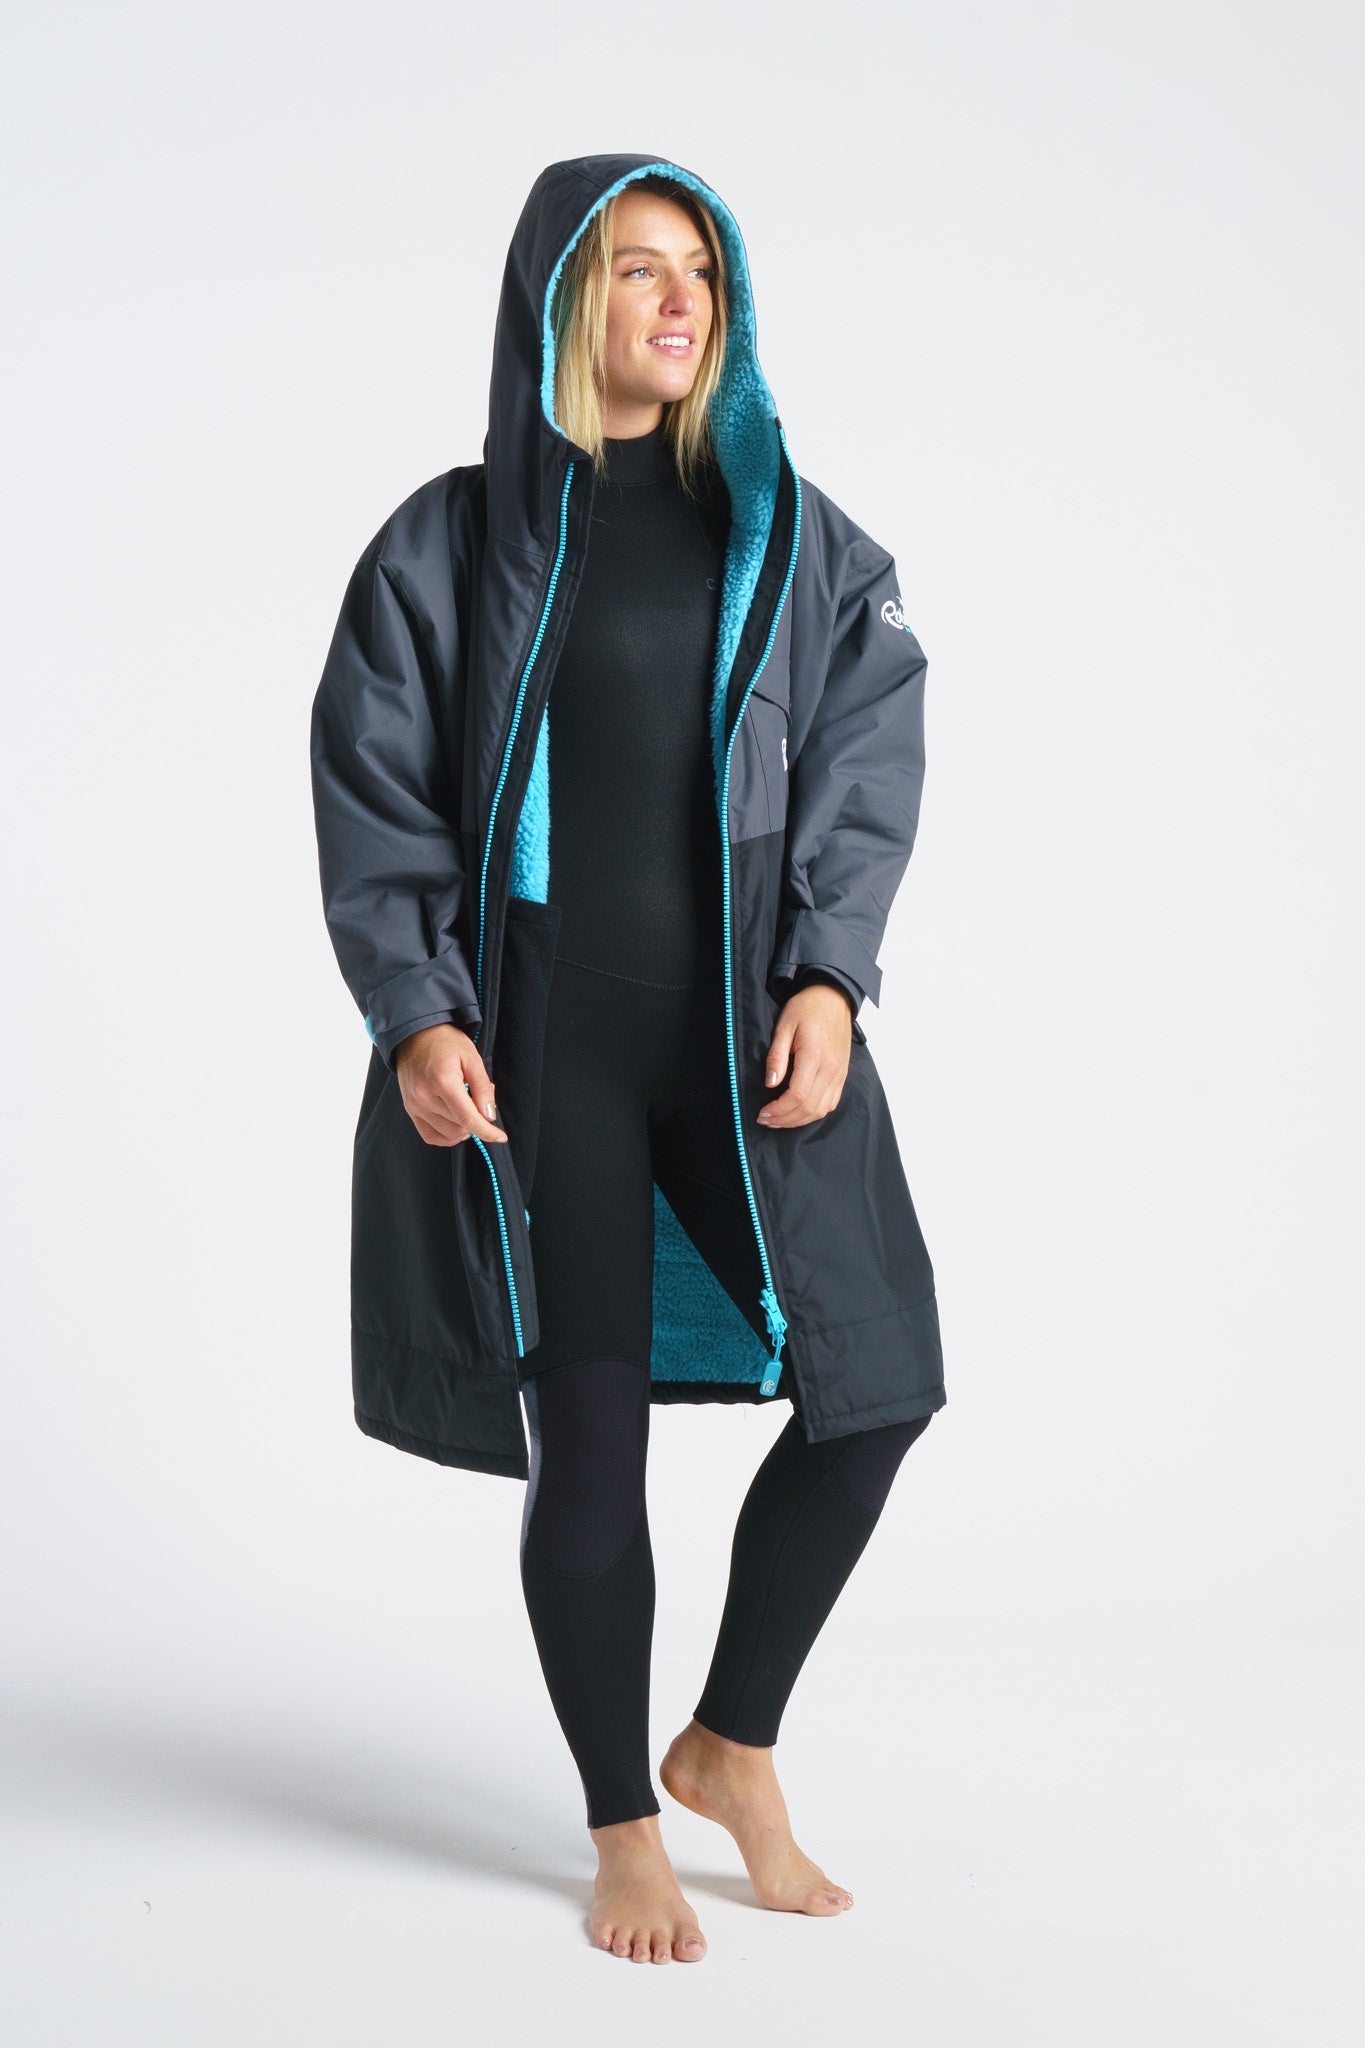 robie-robes-dry-series-changing-robe-waterproof-preorder-product-blacksheepsurfco-galway-ireland-charcoal-blue-atoll-small